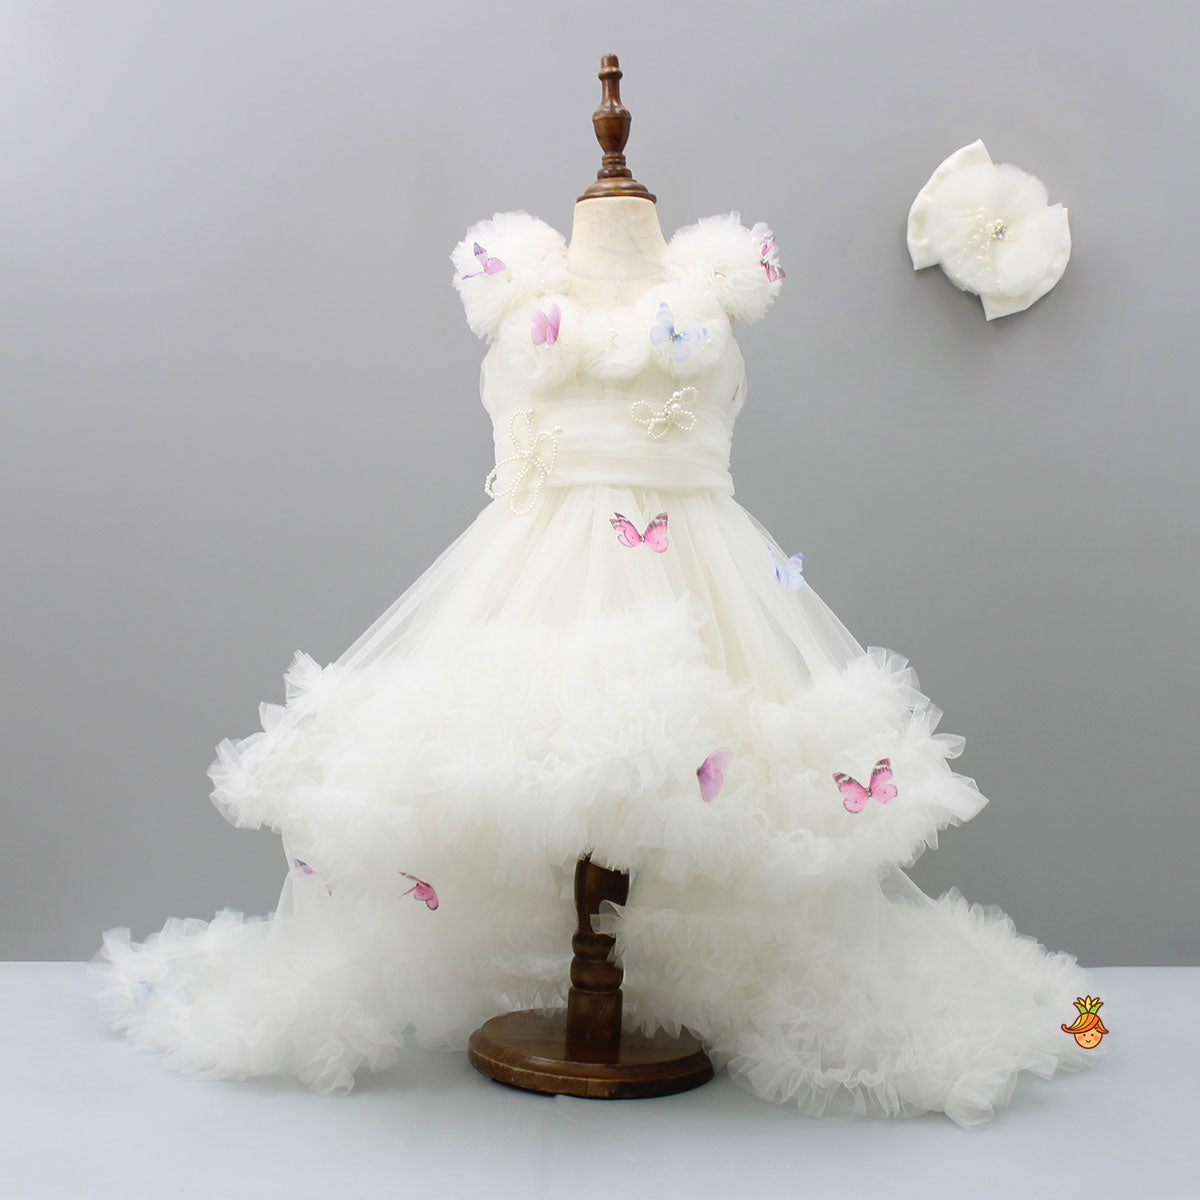 Pre Order: Butterfly Net Off White Trail Dress With Matching Bow Hair Clip